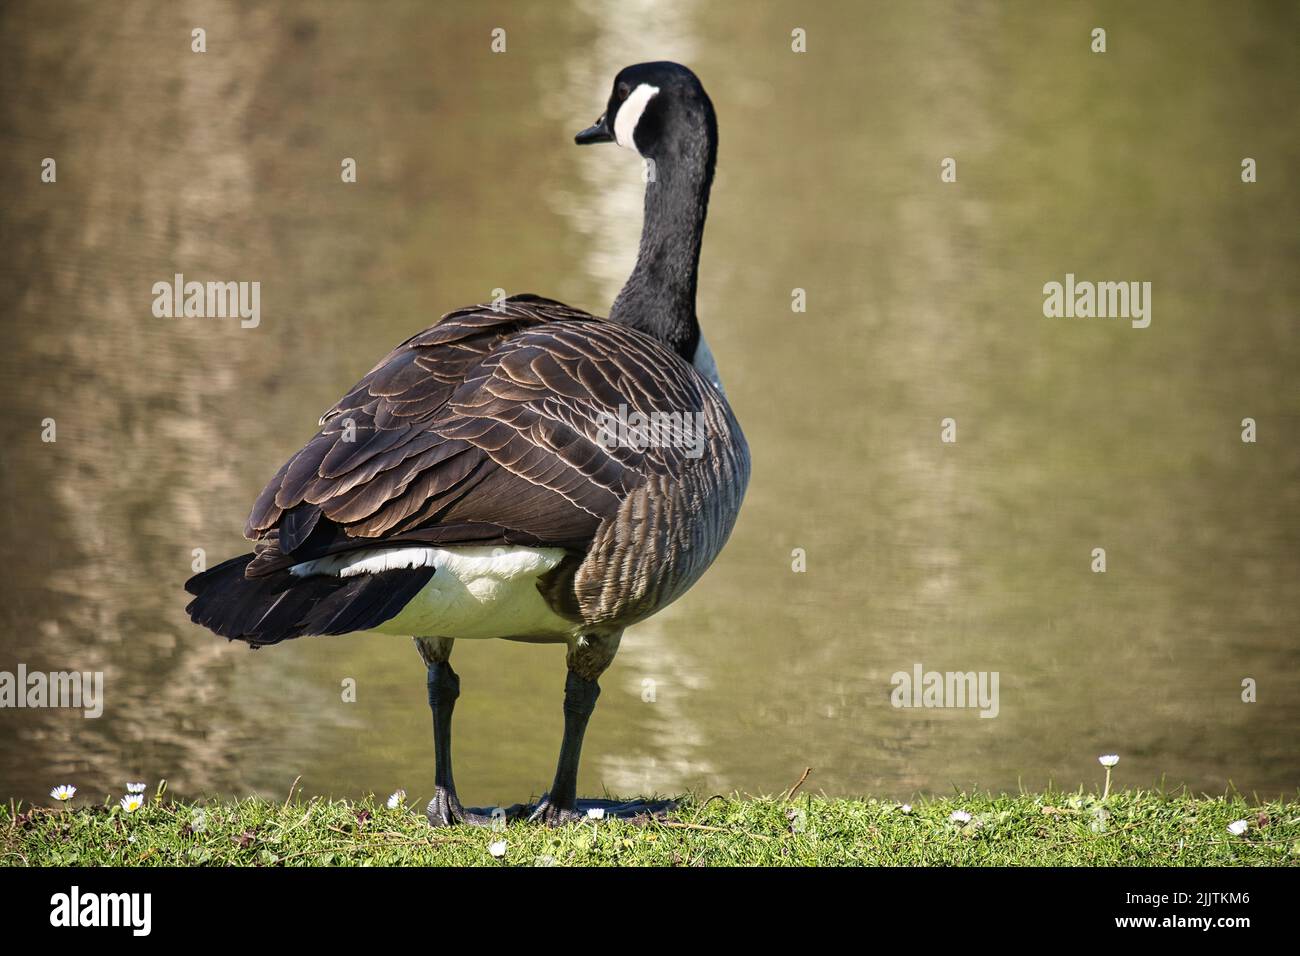 A closeup of a cute Canadian goose perched on grass by a lake on a sunny day Stock Photo